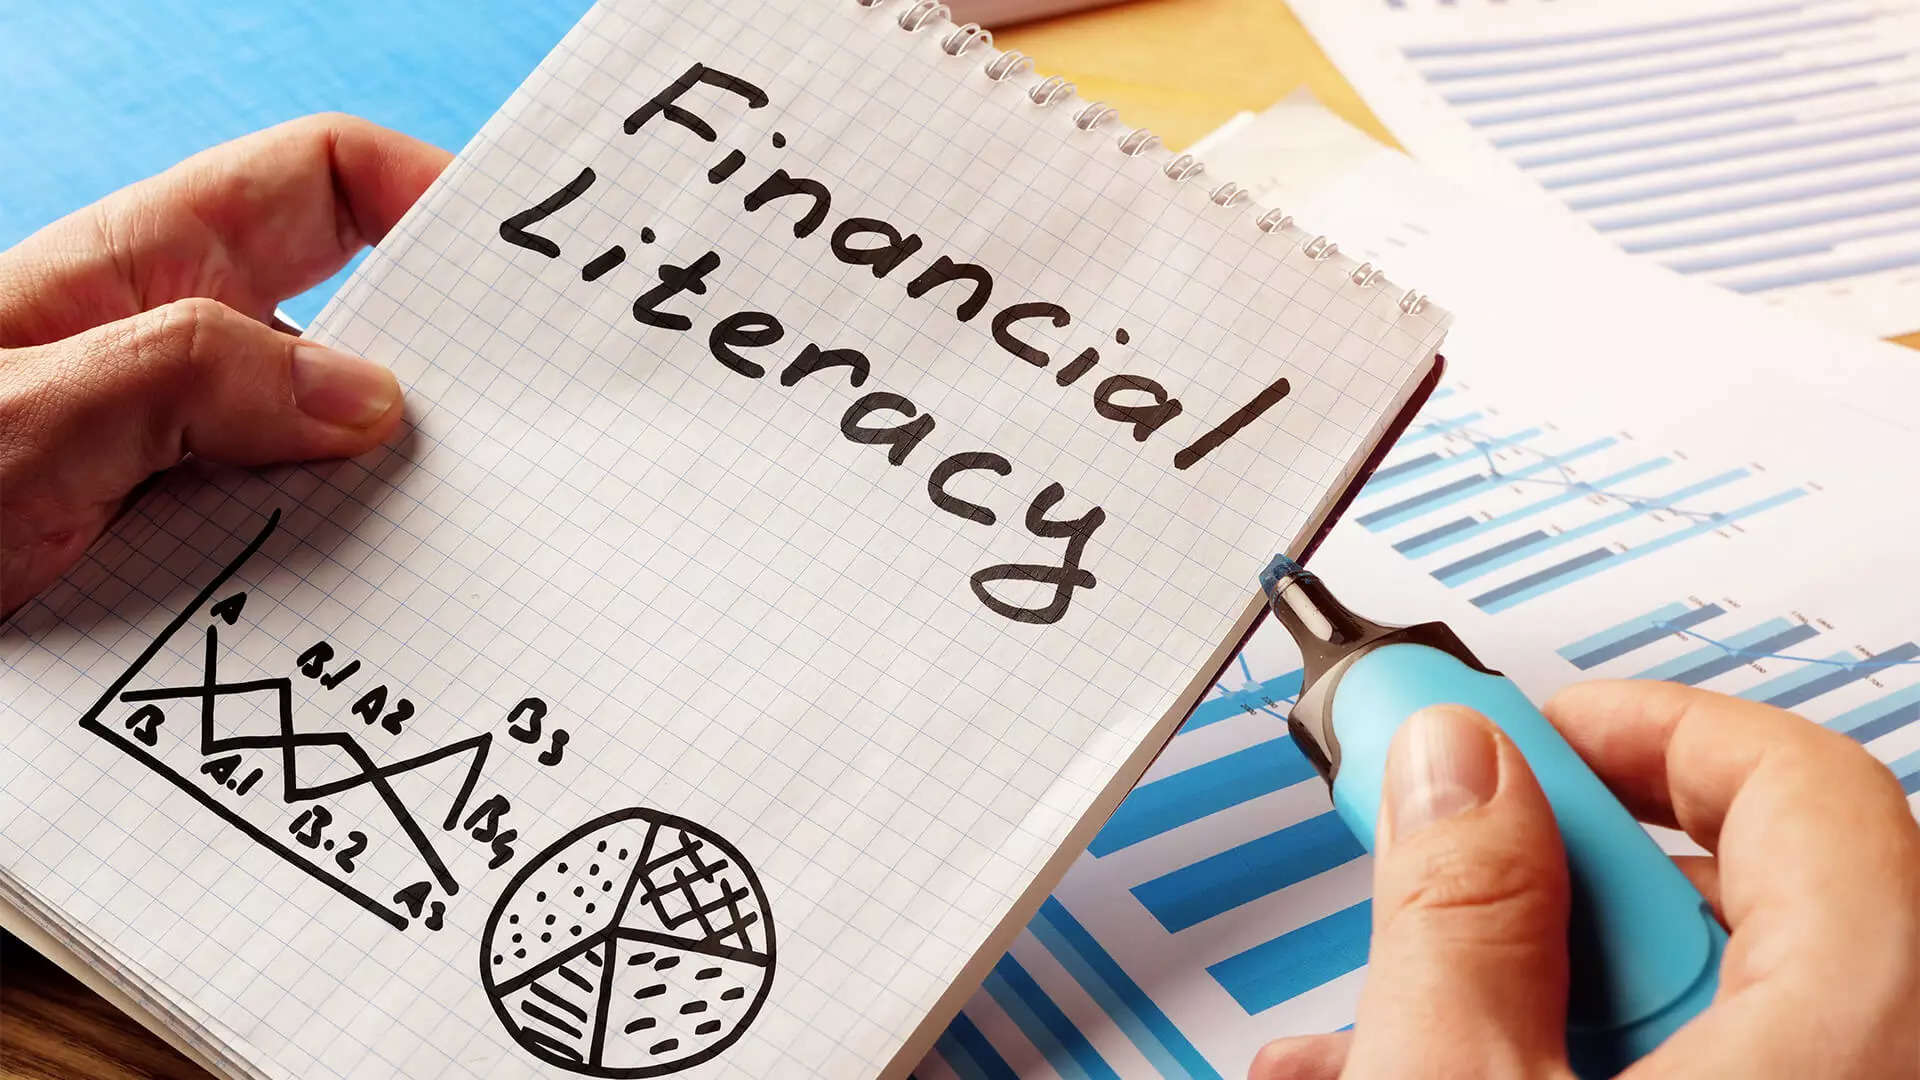 Knowledge of Financial Literacy to make students and educators financially aware